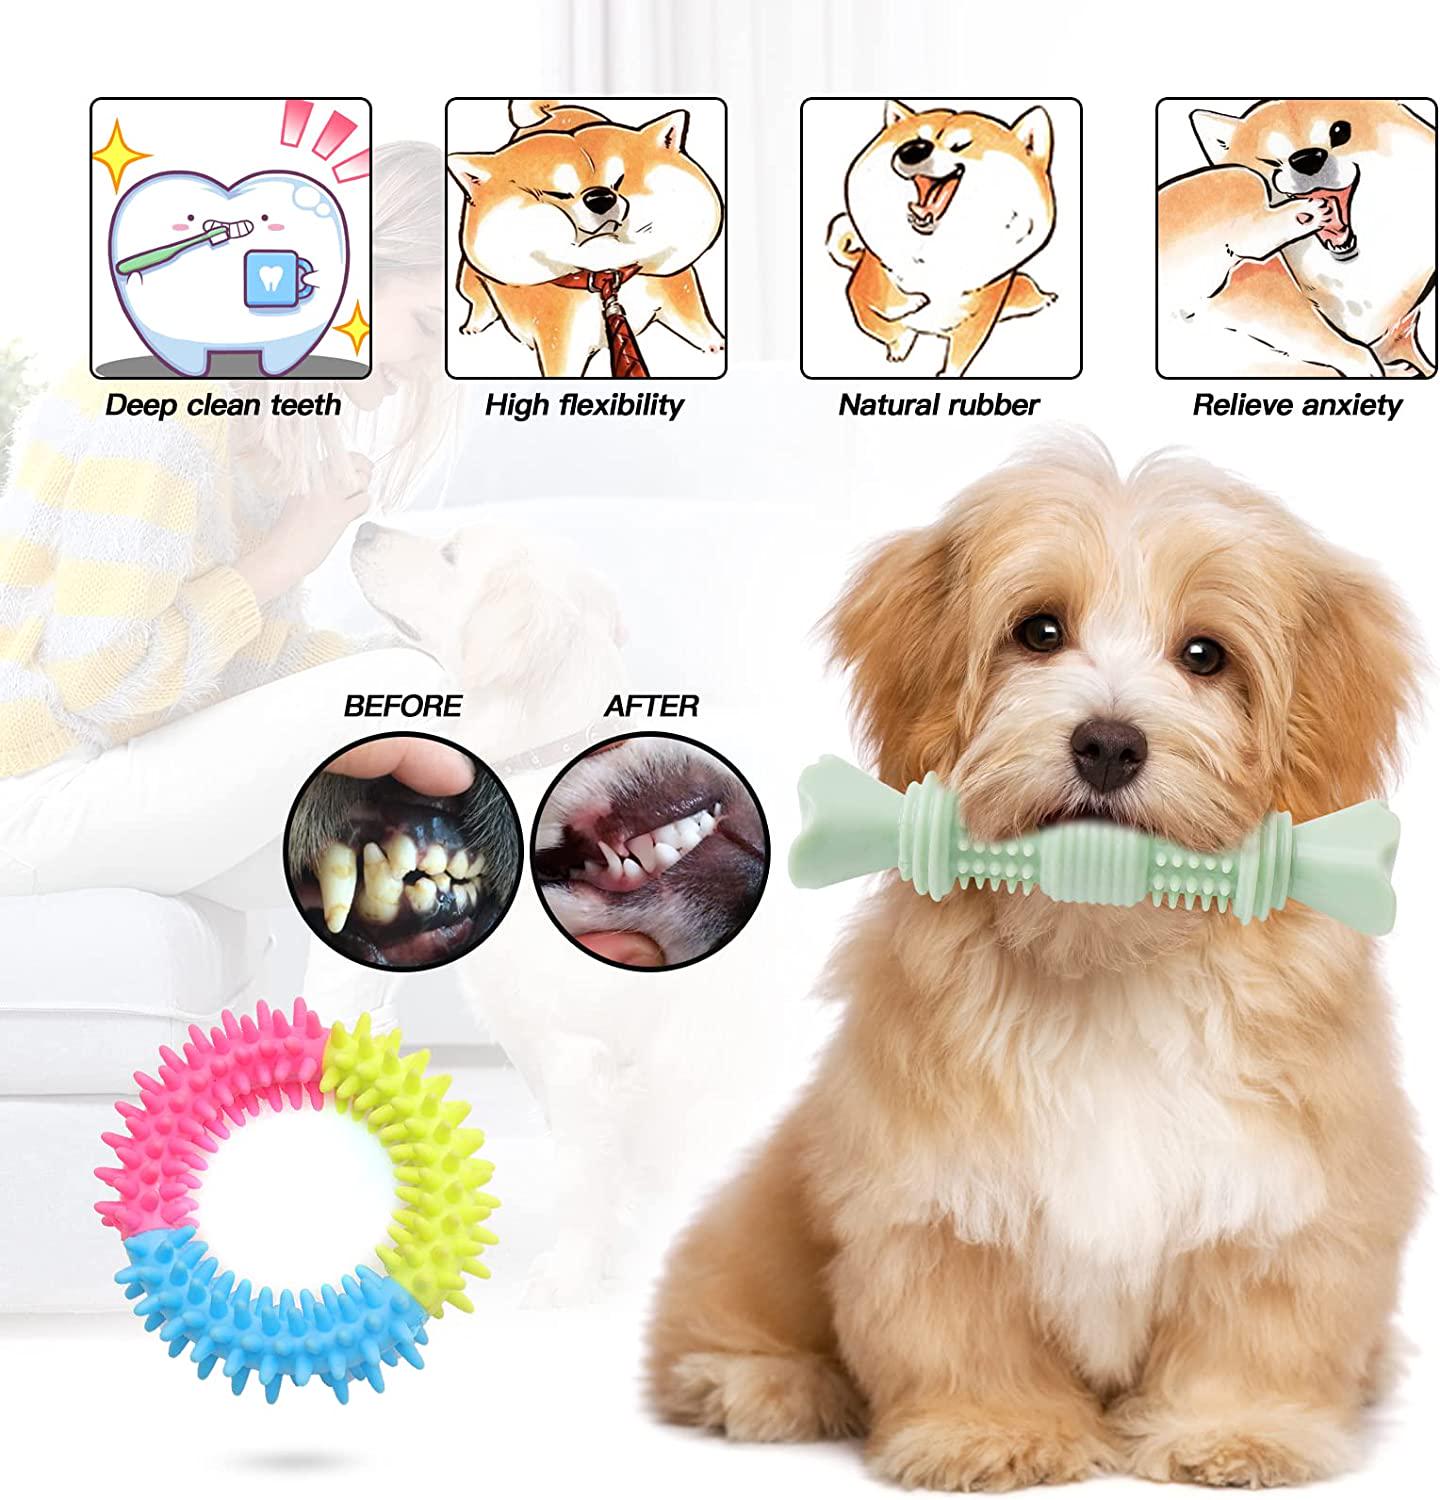 Dog Chew Toys 20 Pack Indestructible Pet Interactive Tug of War Rope Toys for Puppies Chewers